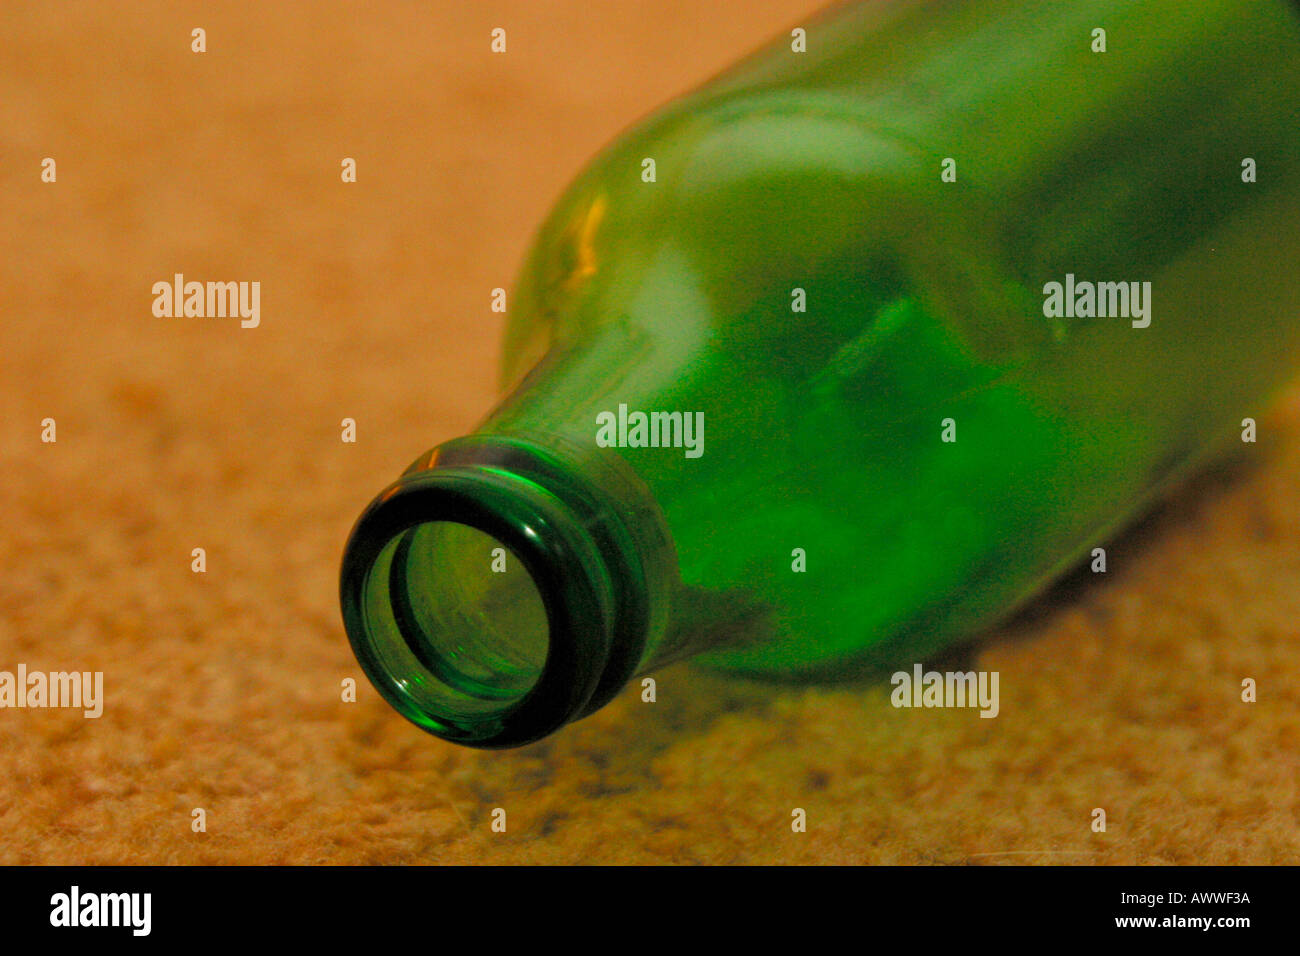 Empty beer bottle discarded on carpeted floor Stock Photo